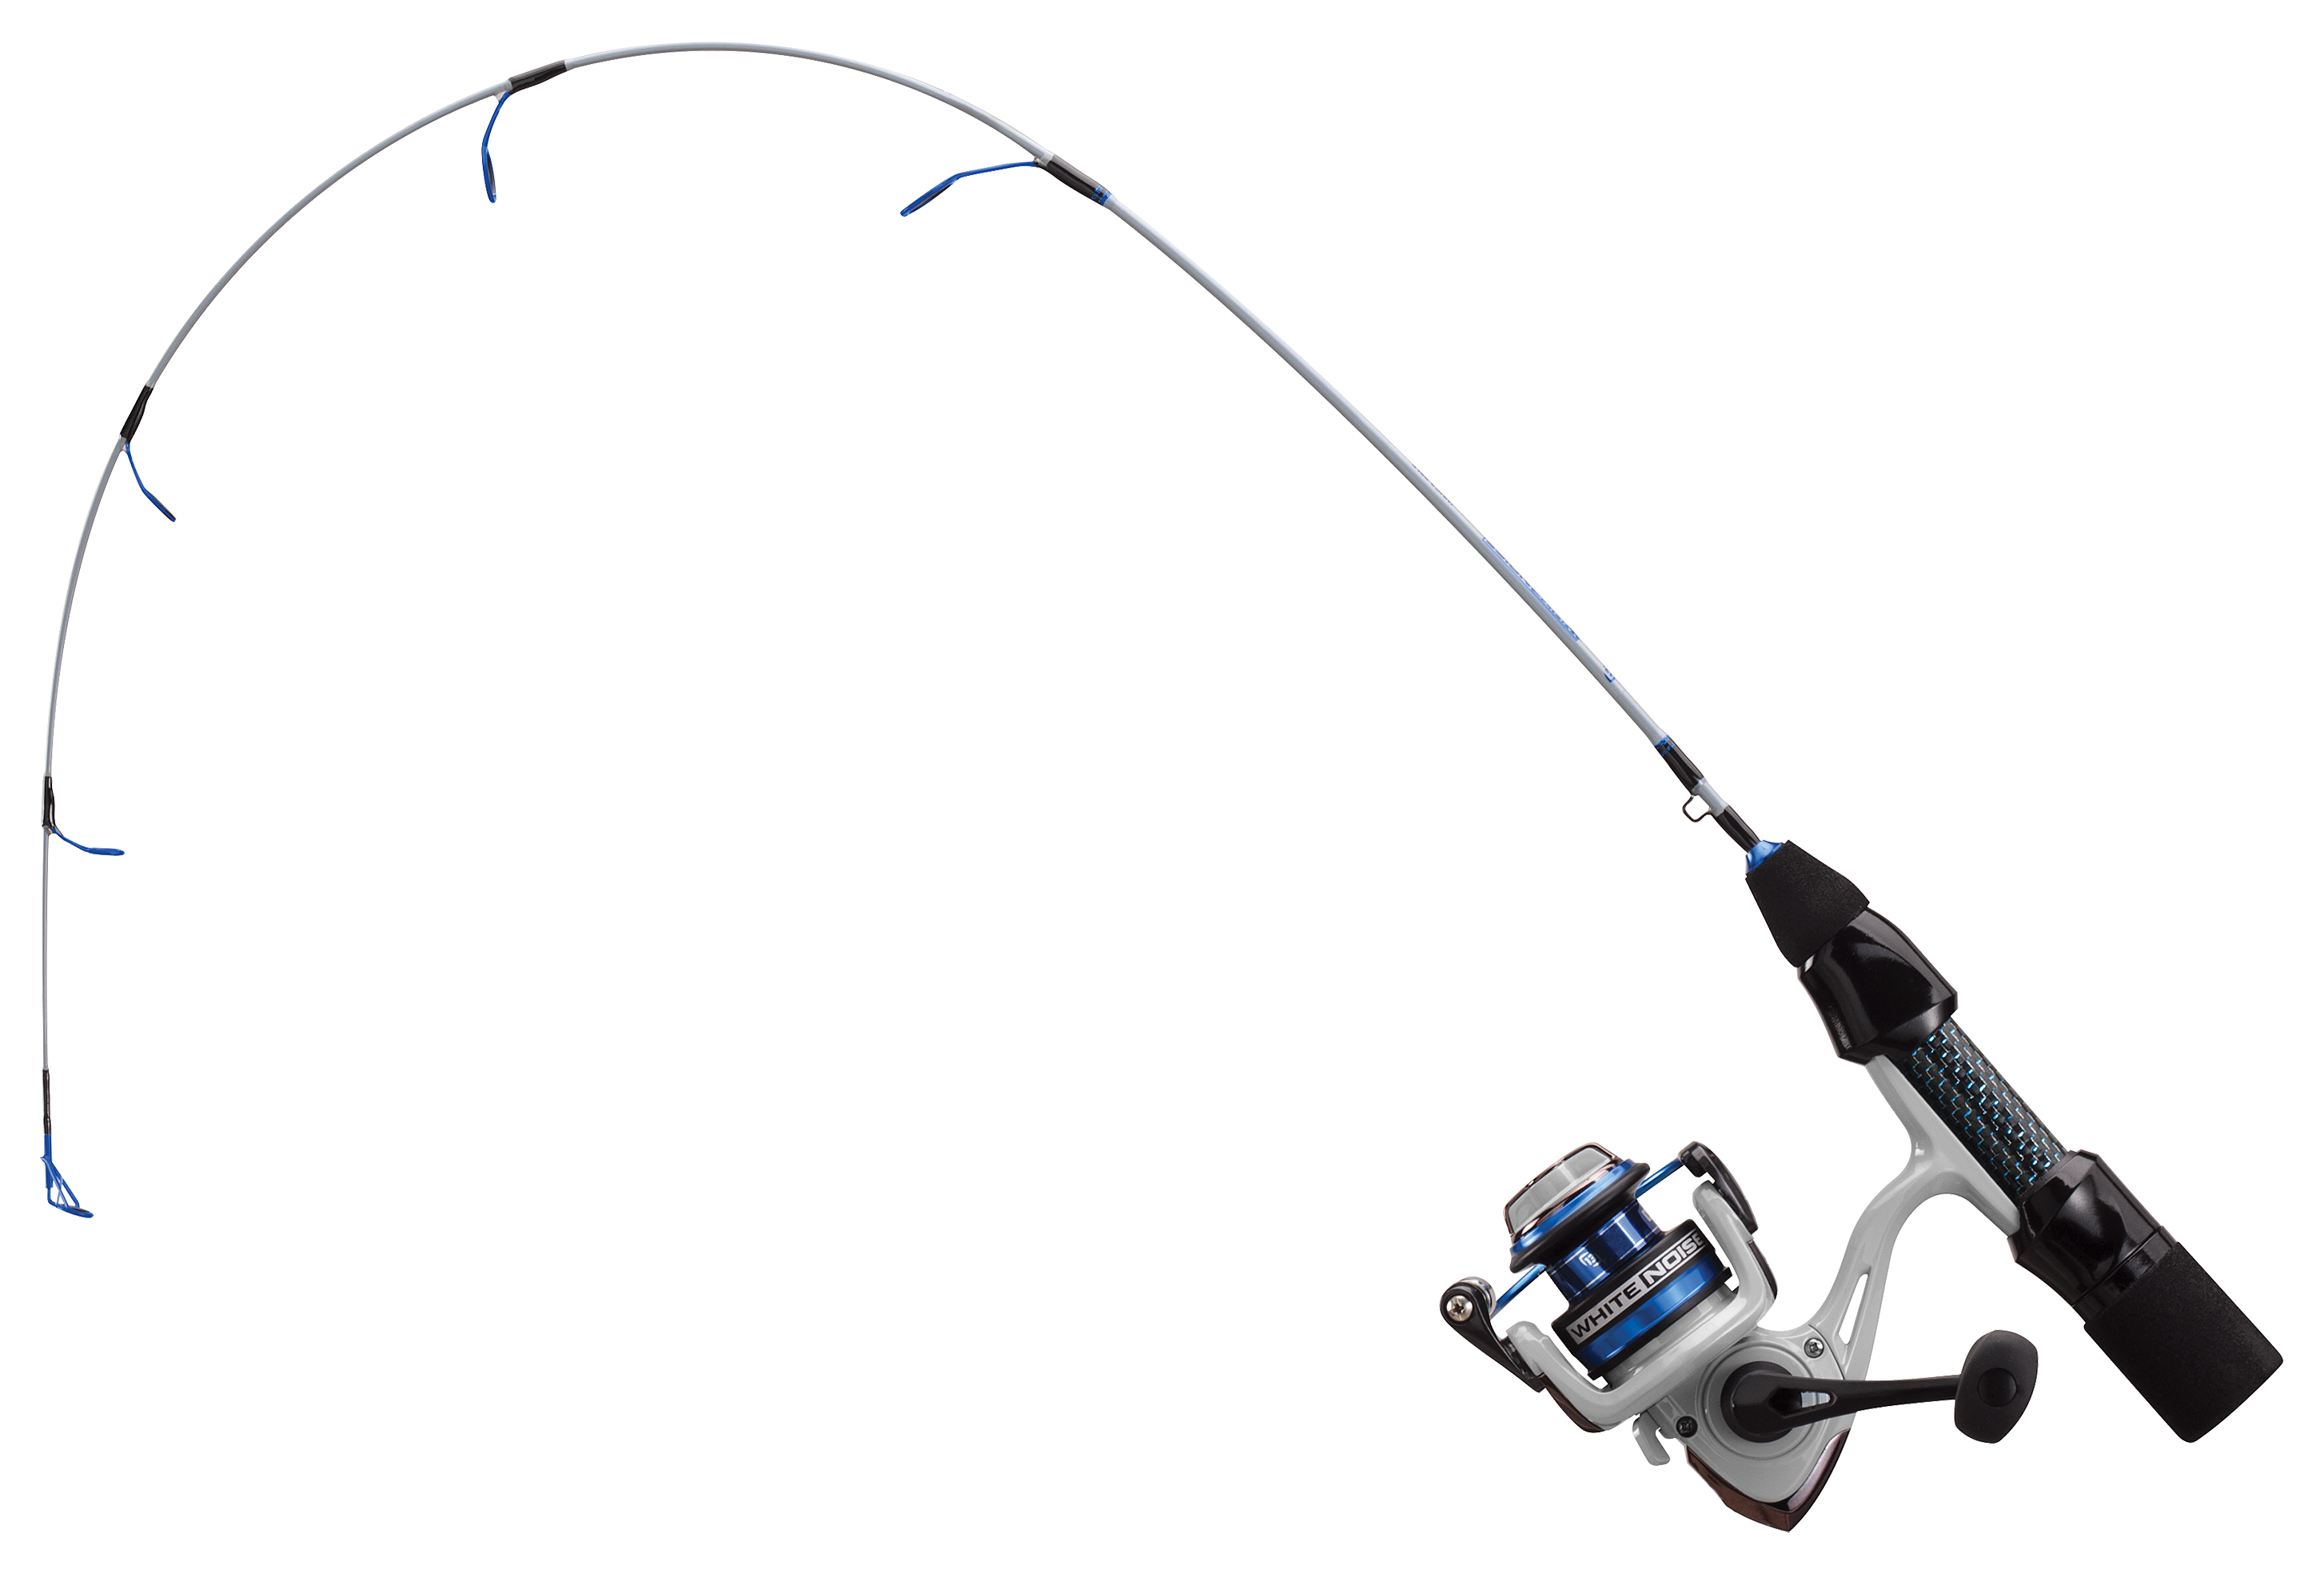 13 Fishing Ambition Ice Spinning Combo for Youth